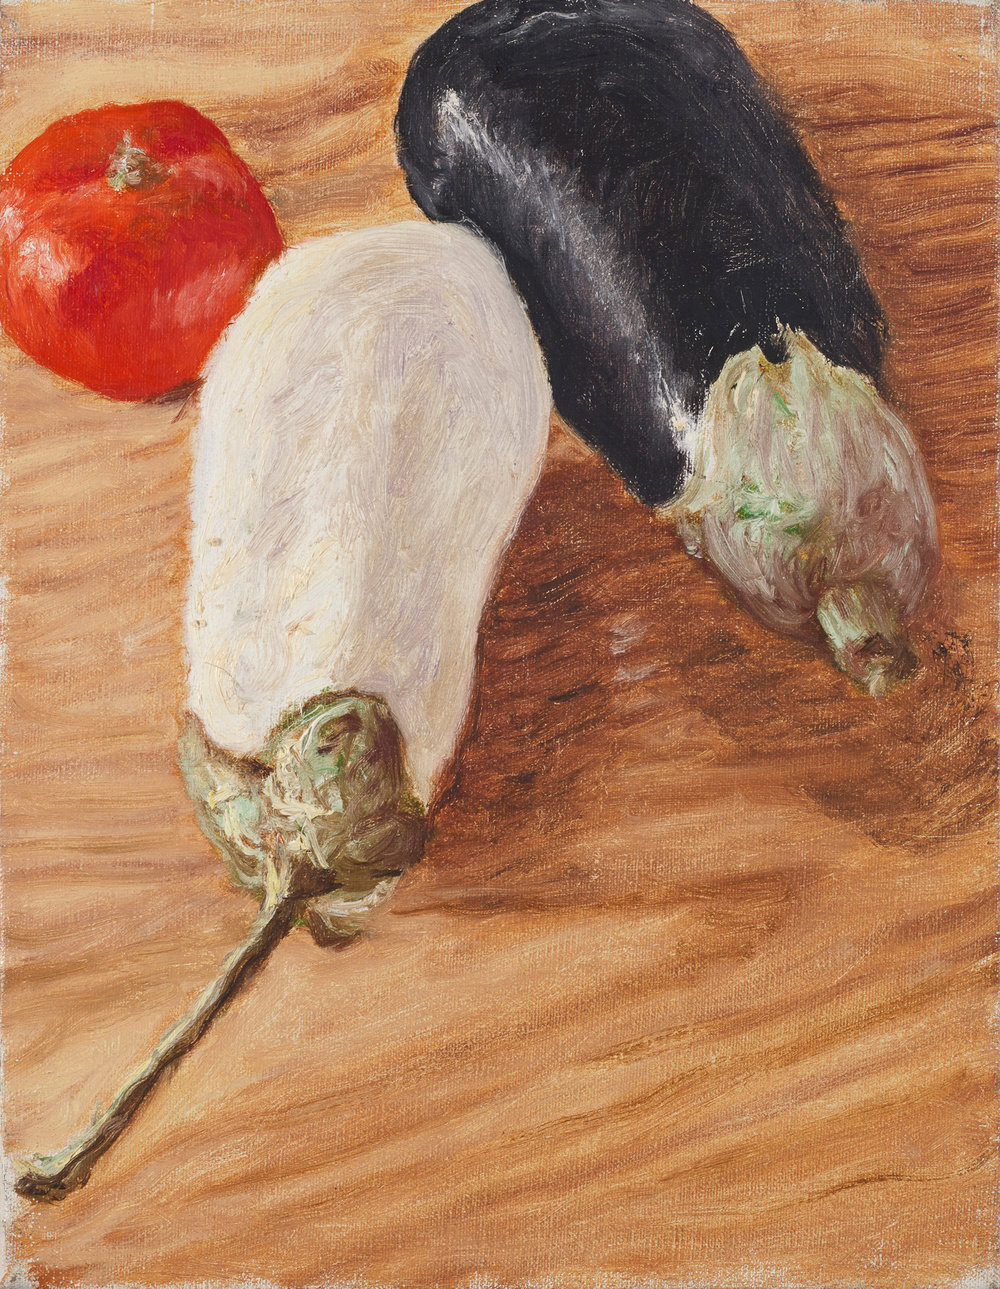 Arikha, tomato and two aubergines, 1994, oil on canvas, 13 x 10 1 16 in